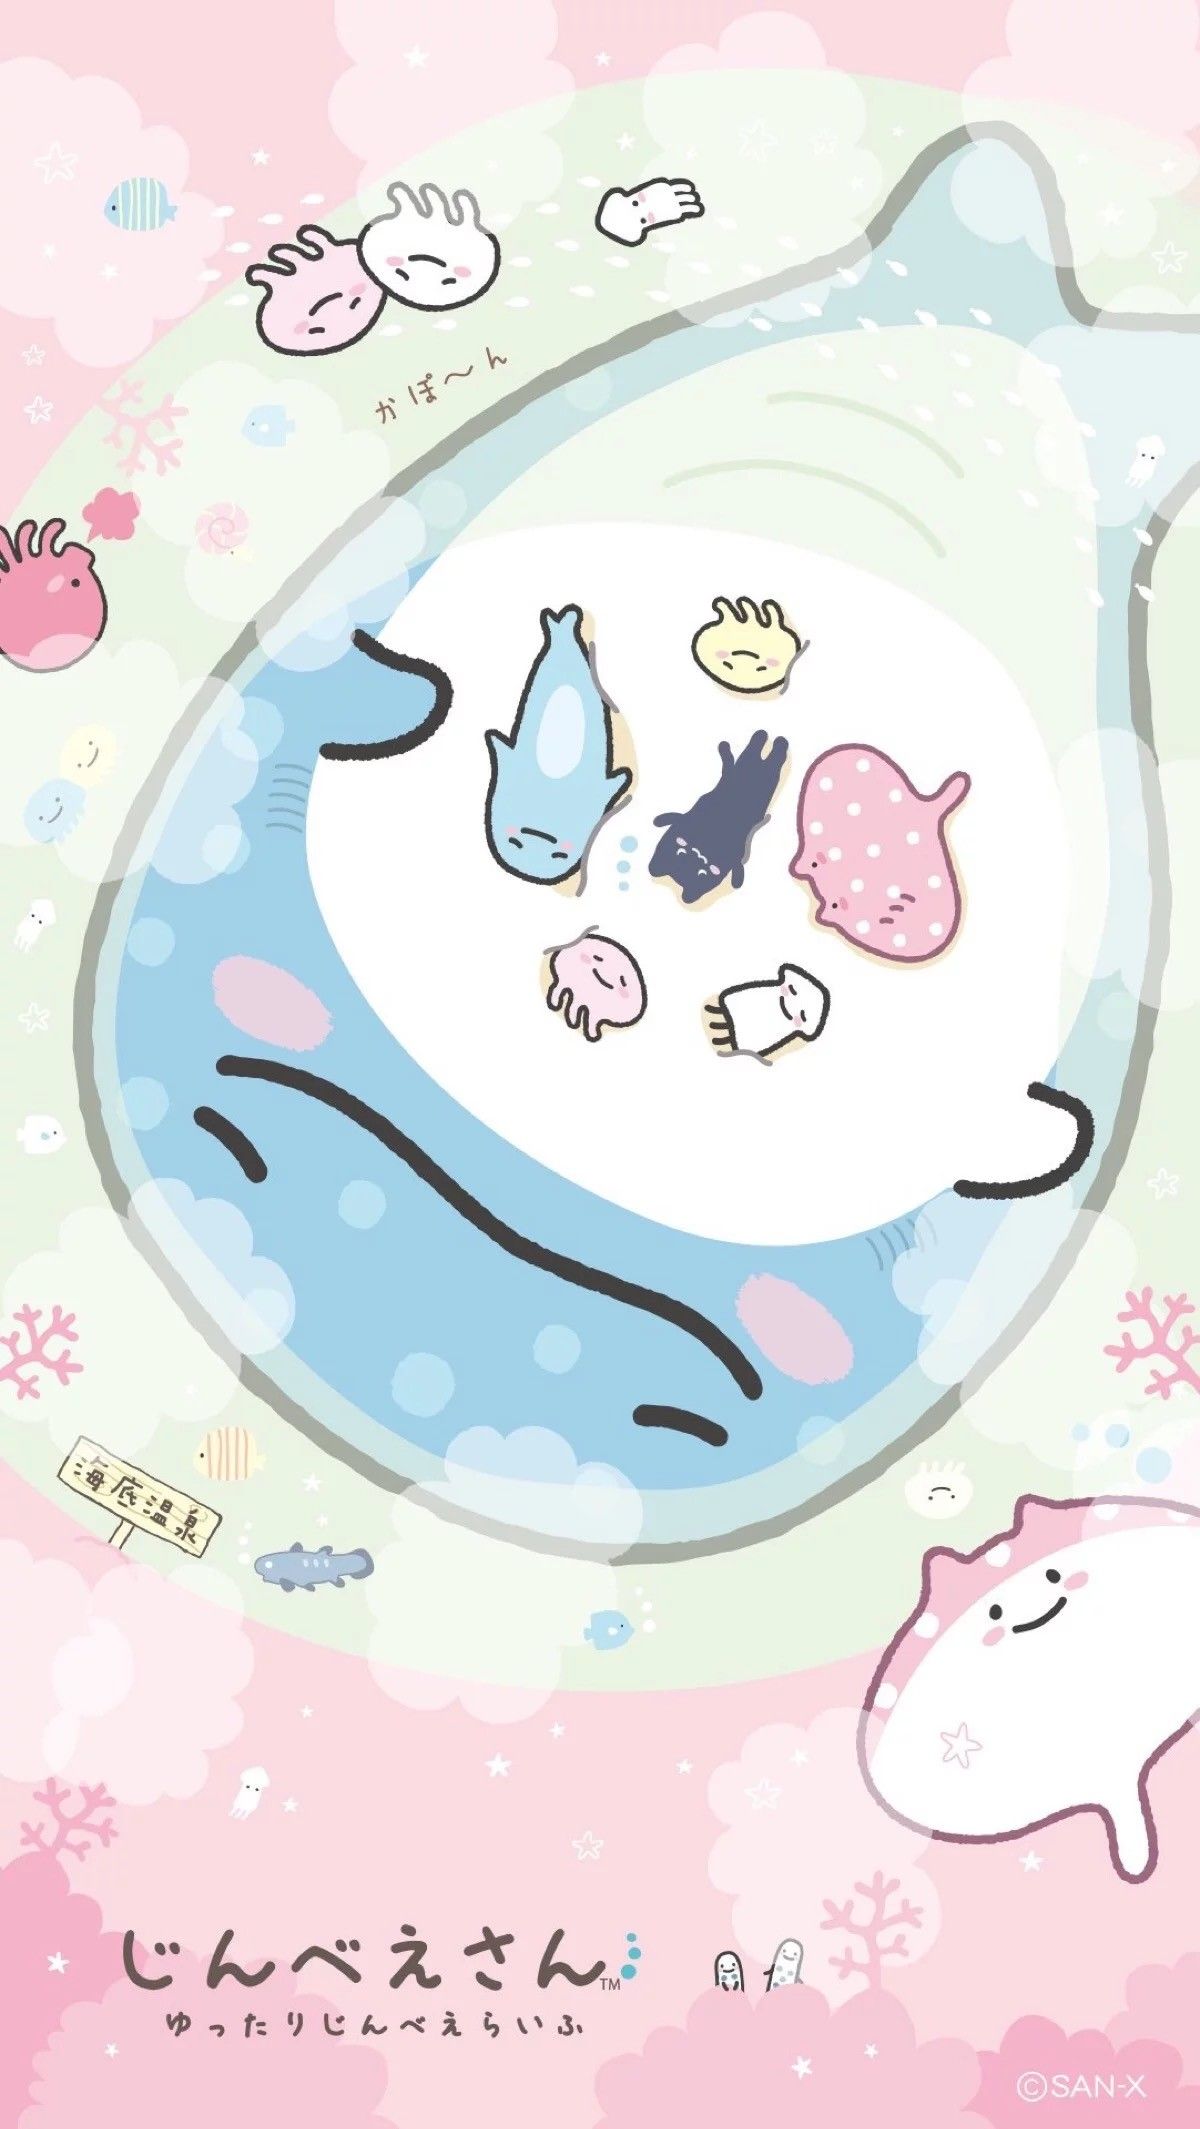 A whale shark with fish friends swimming in its mouth - Sanrio